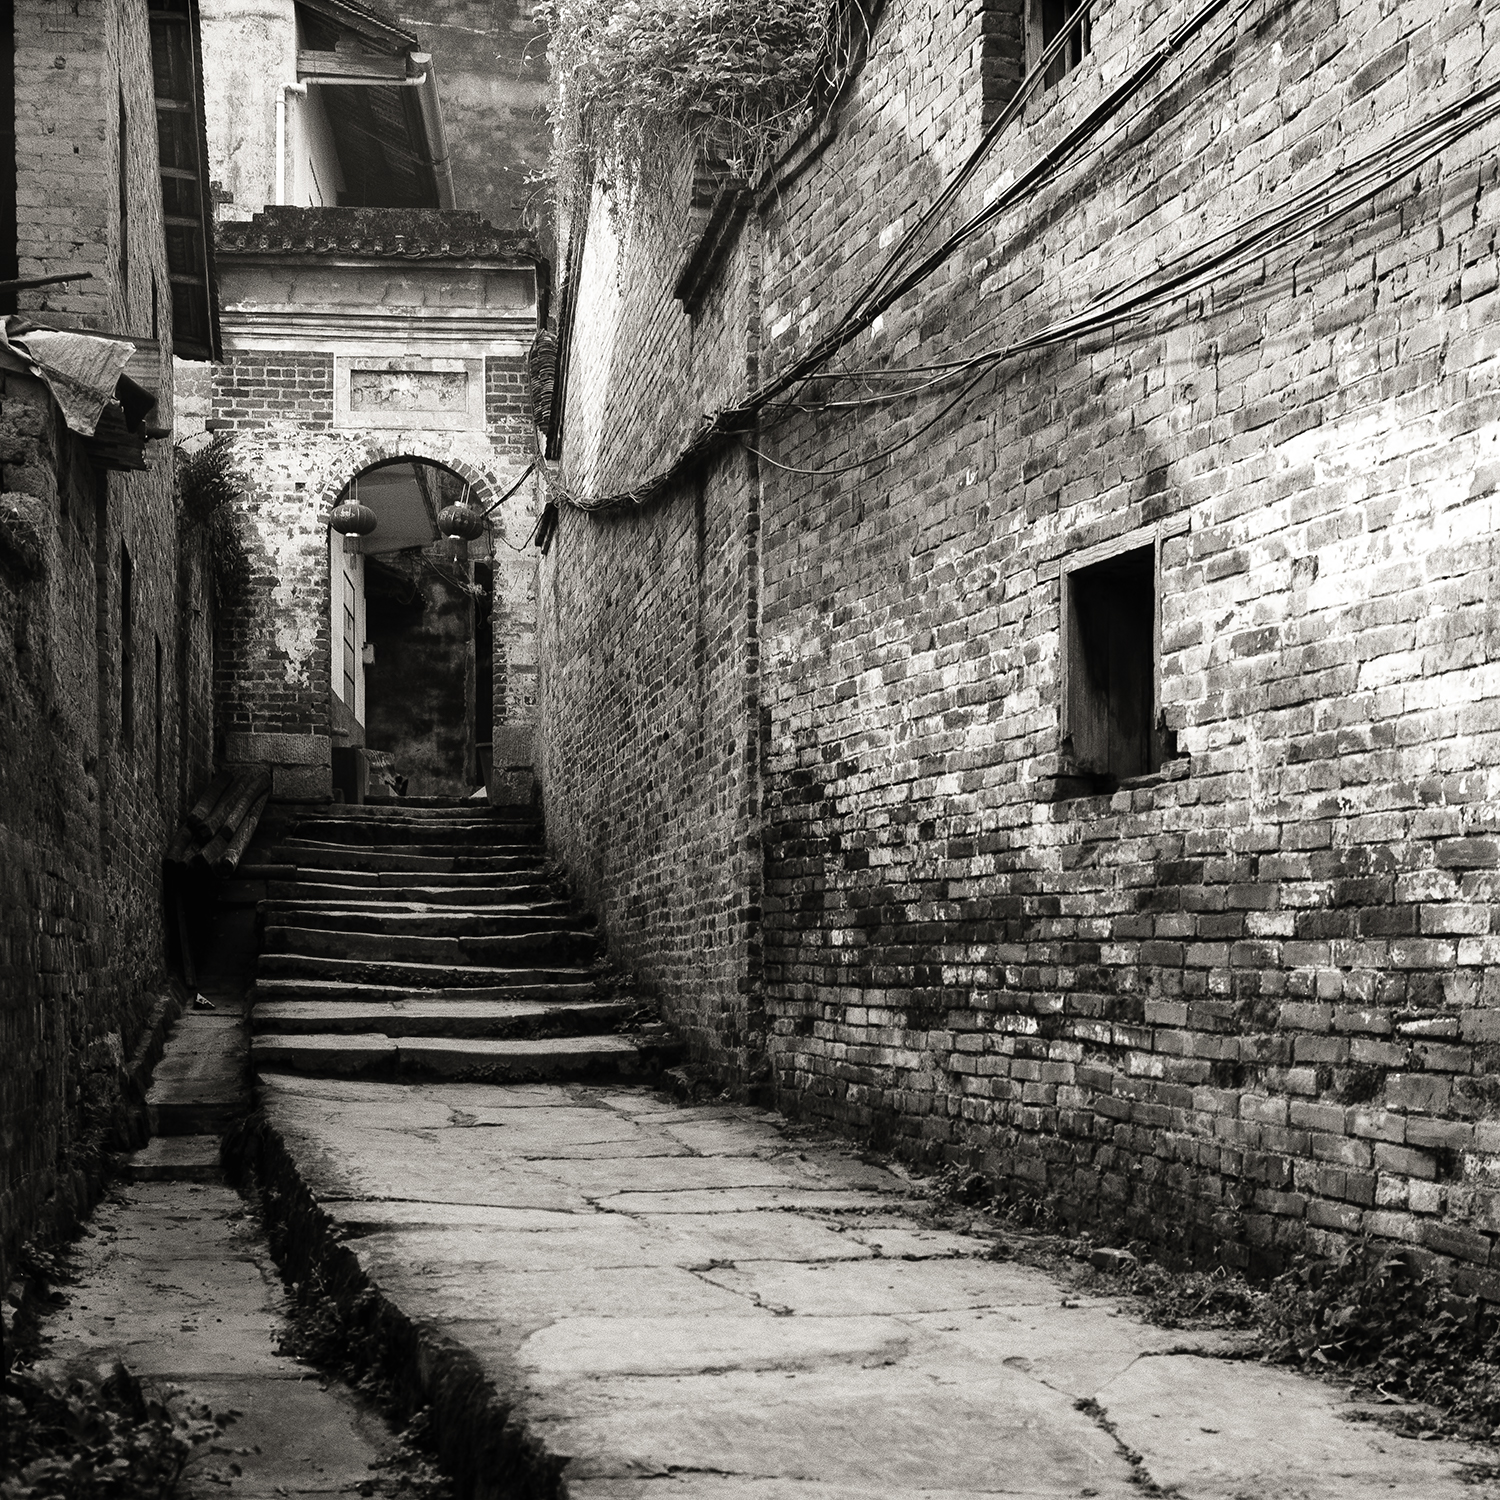 Alley, China, 2018